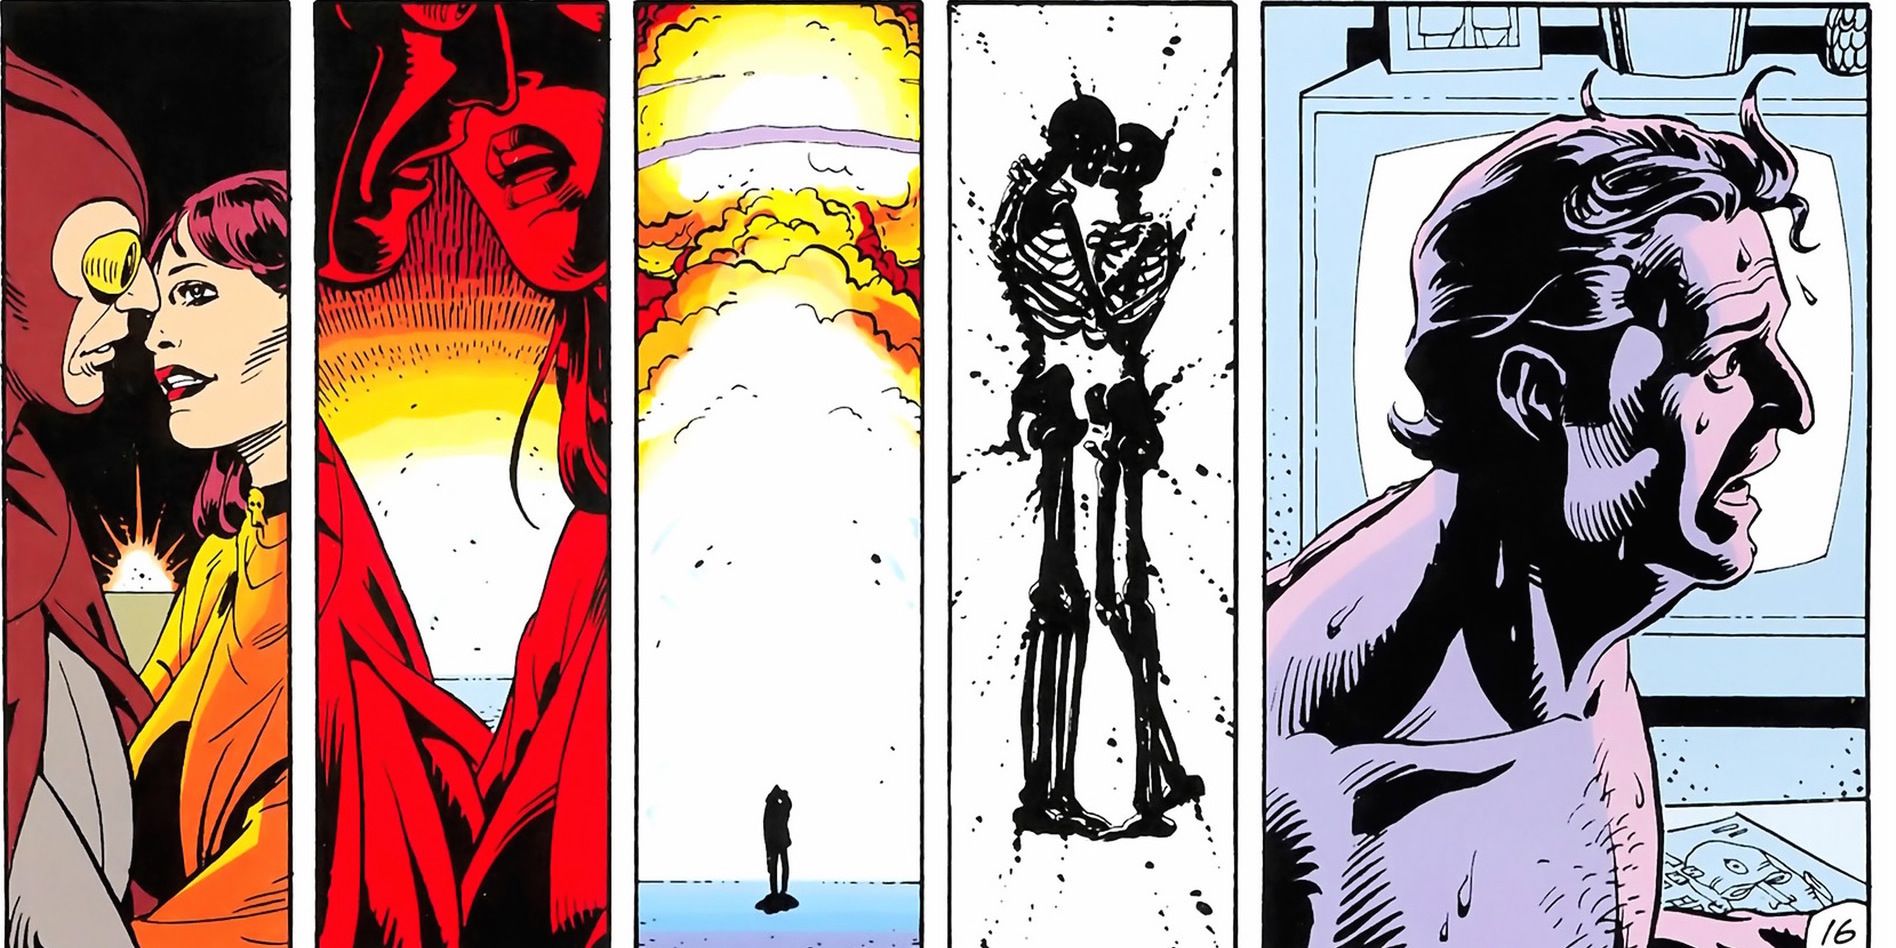 Owlman and Silk Spectre vision of death in the Watchmen comic